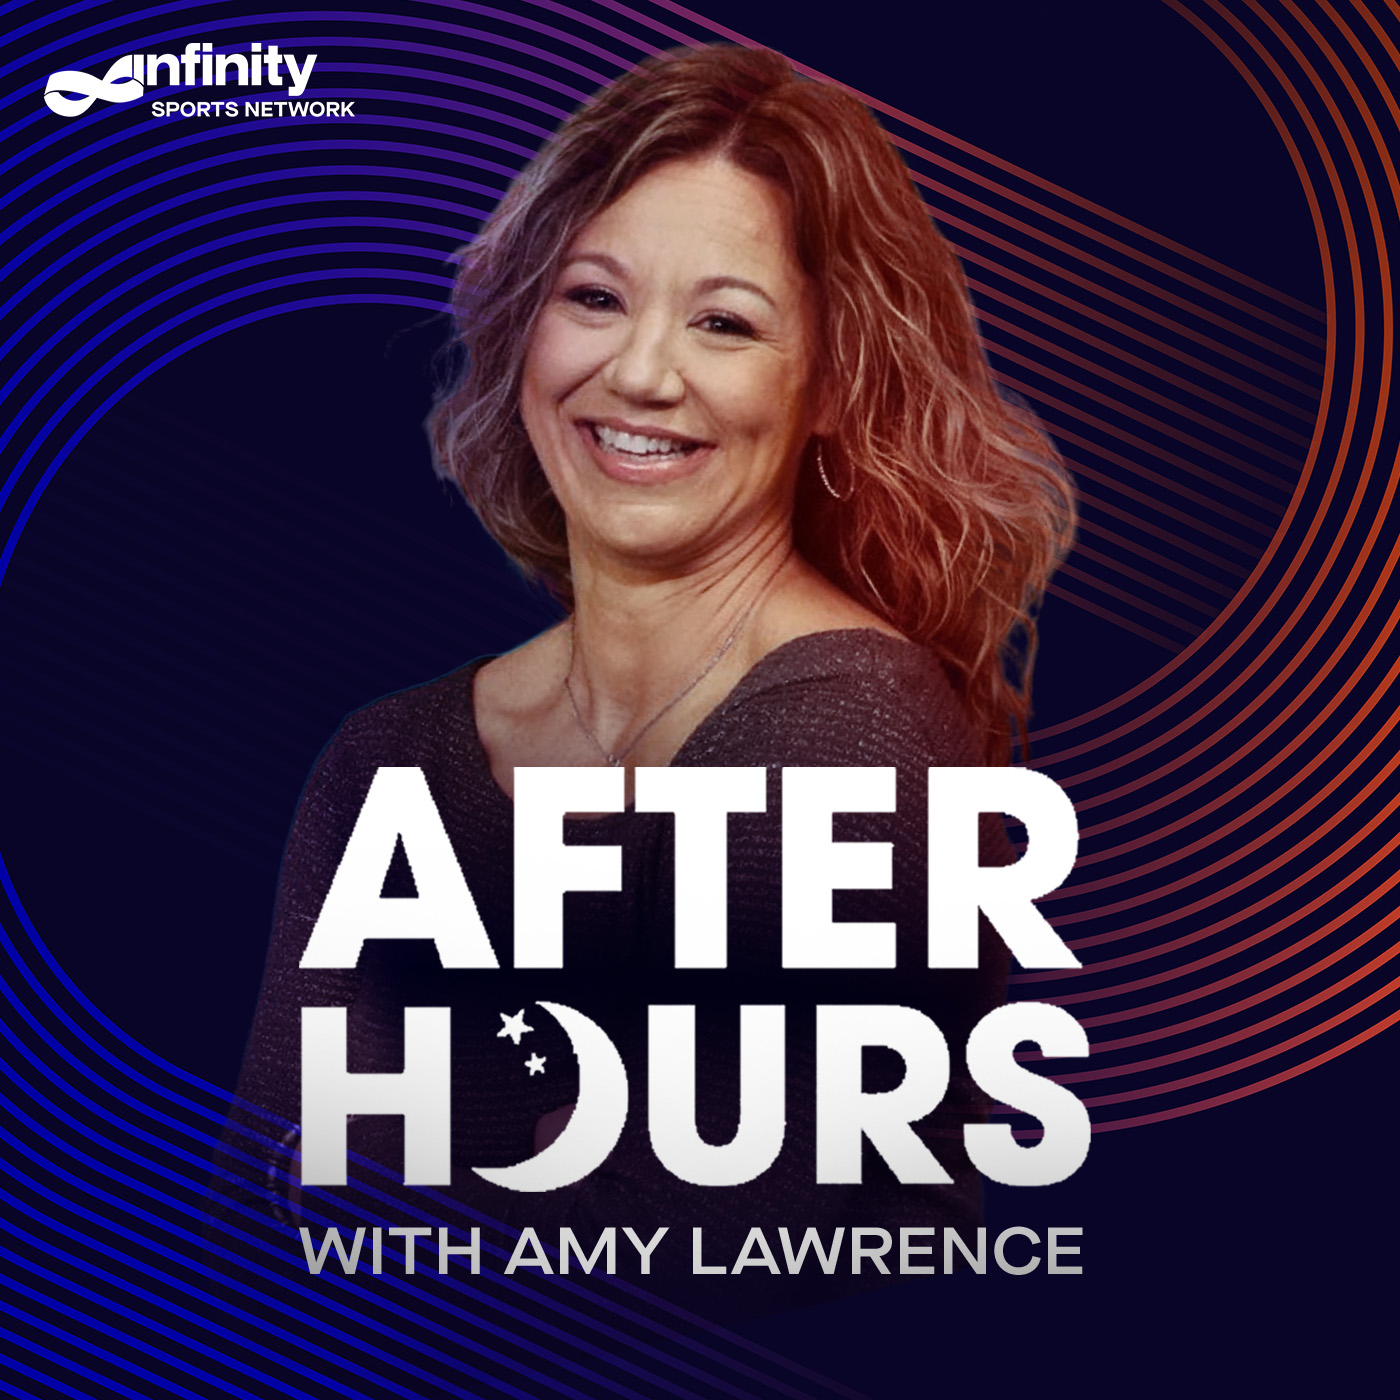 12-2-21 After Hours with Amy Lawrence PODCAST: Hour 2